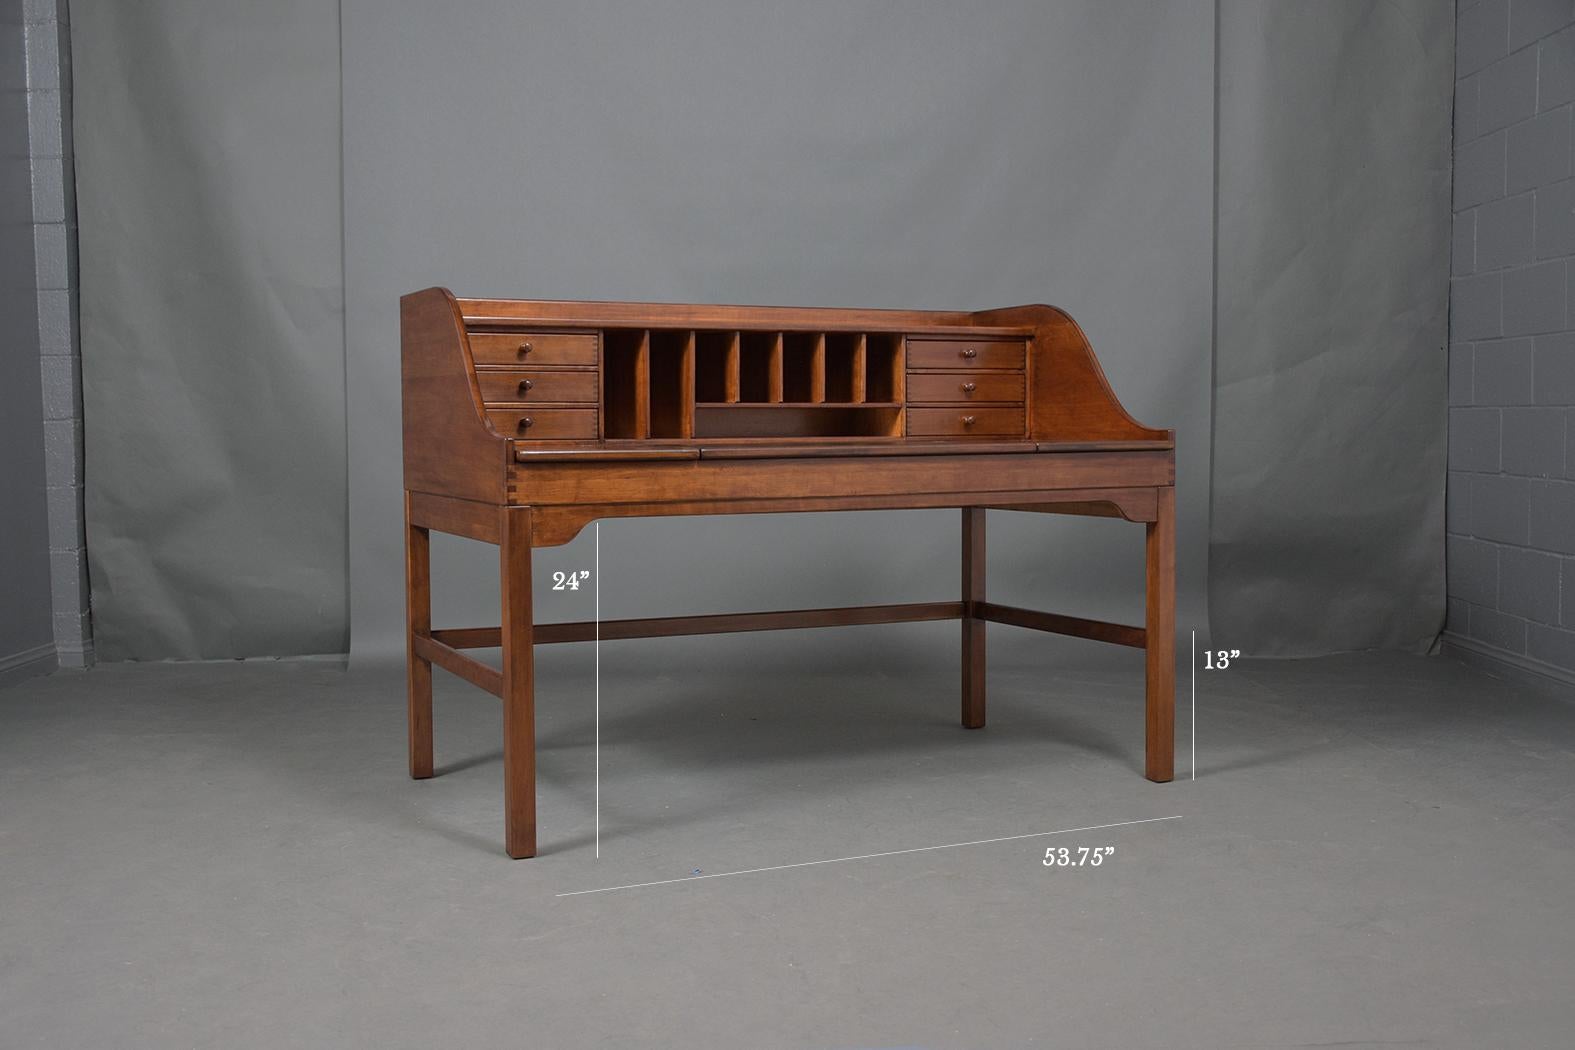 An extraordinary modern danish architect desk beautifully crafted out of teak wood professionally restored and newly lacquered and polished by our craftsmen team. This beautiful piece features a walnut color patina finish, top gallery molding, six